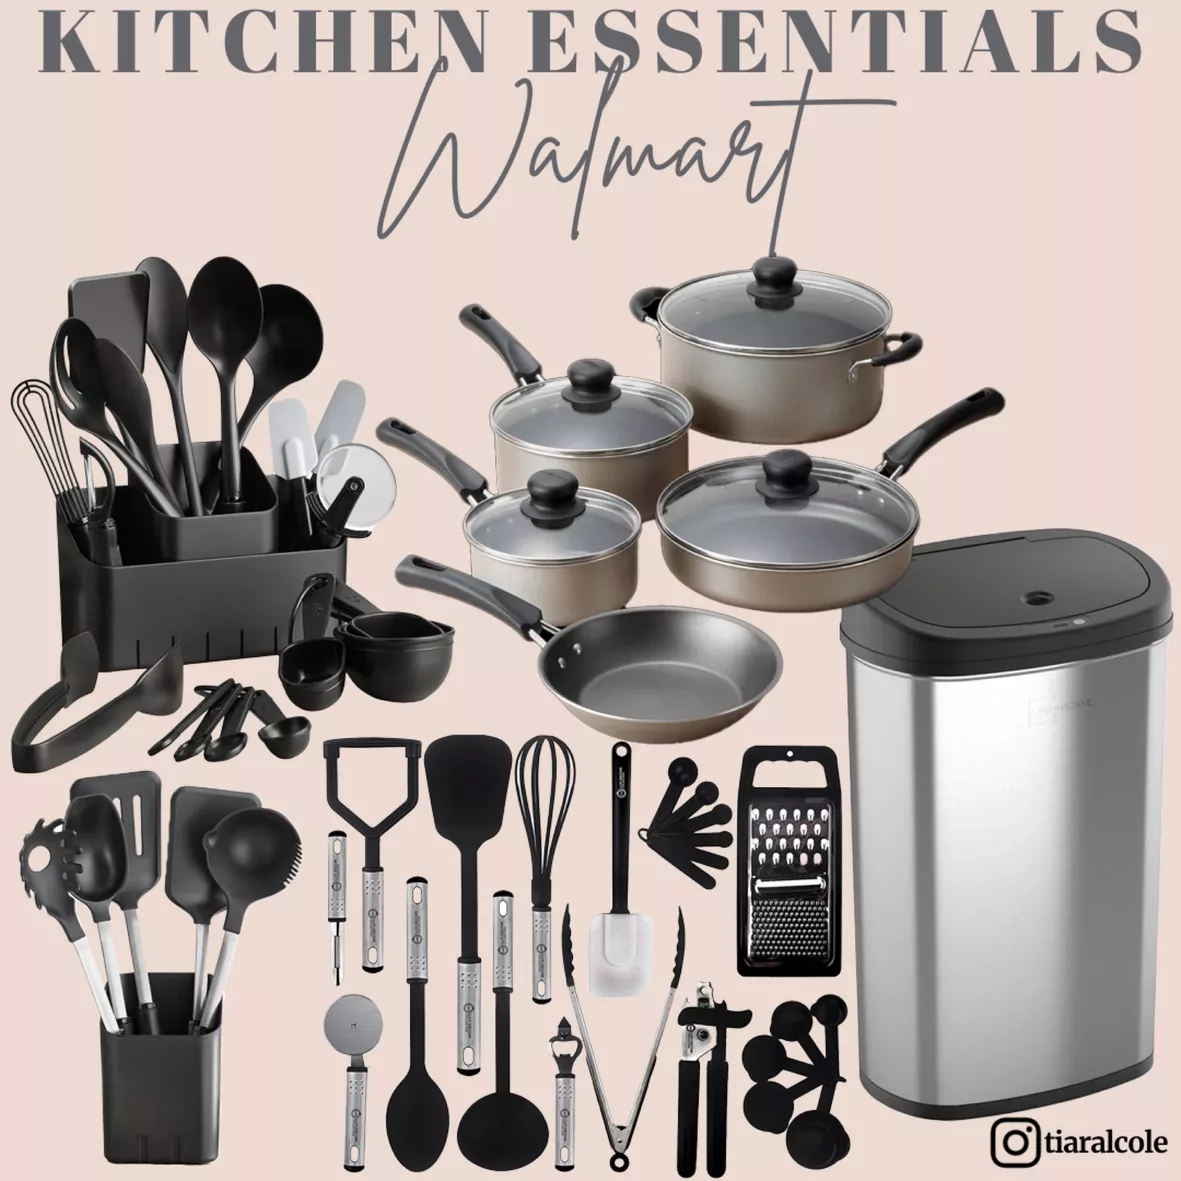 UPGRADE YOUR COOKING GAME WITH MUST-HAVE KITCHEN